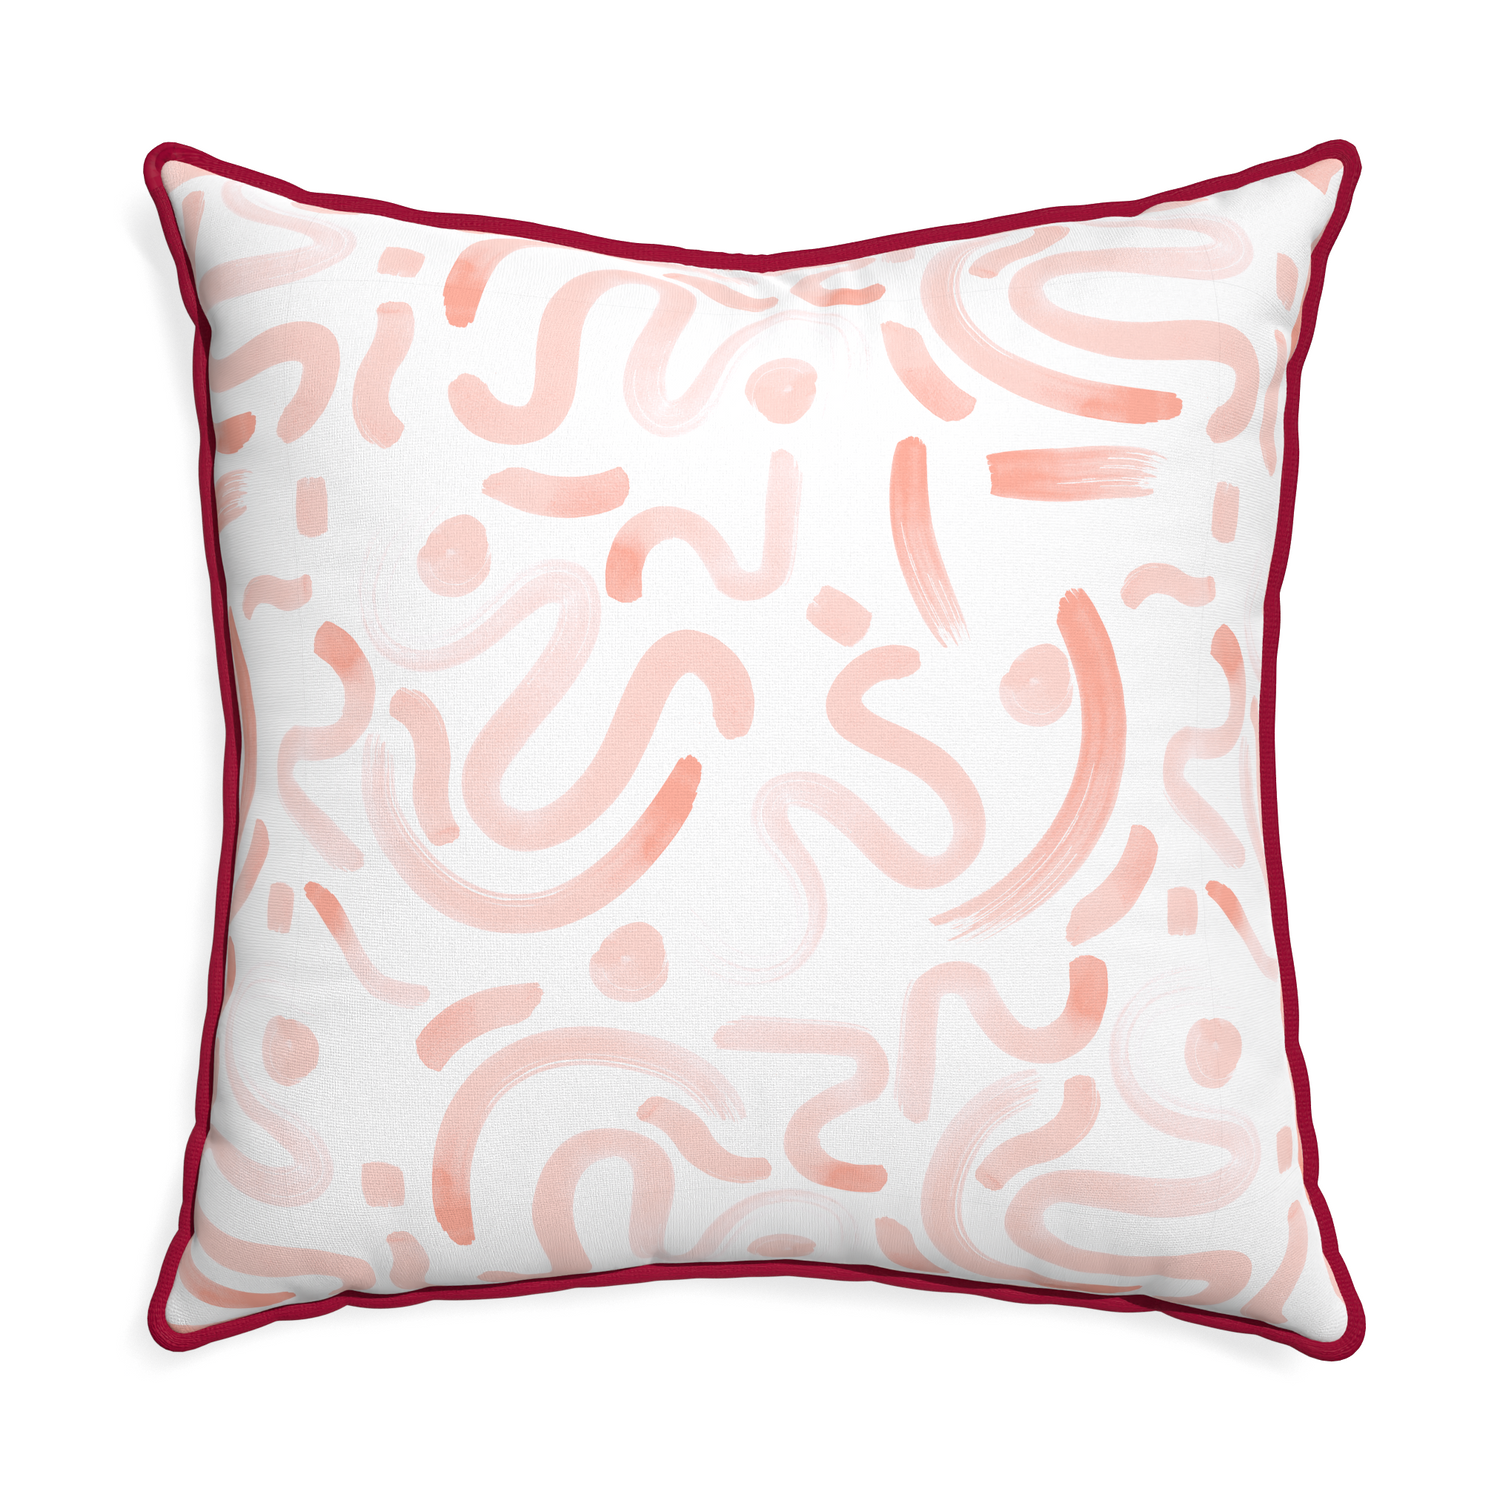 Euro-sham hockney pink custom pillow with raspberry piping on white background